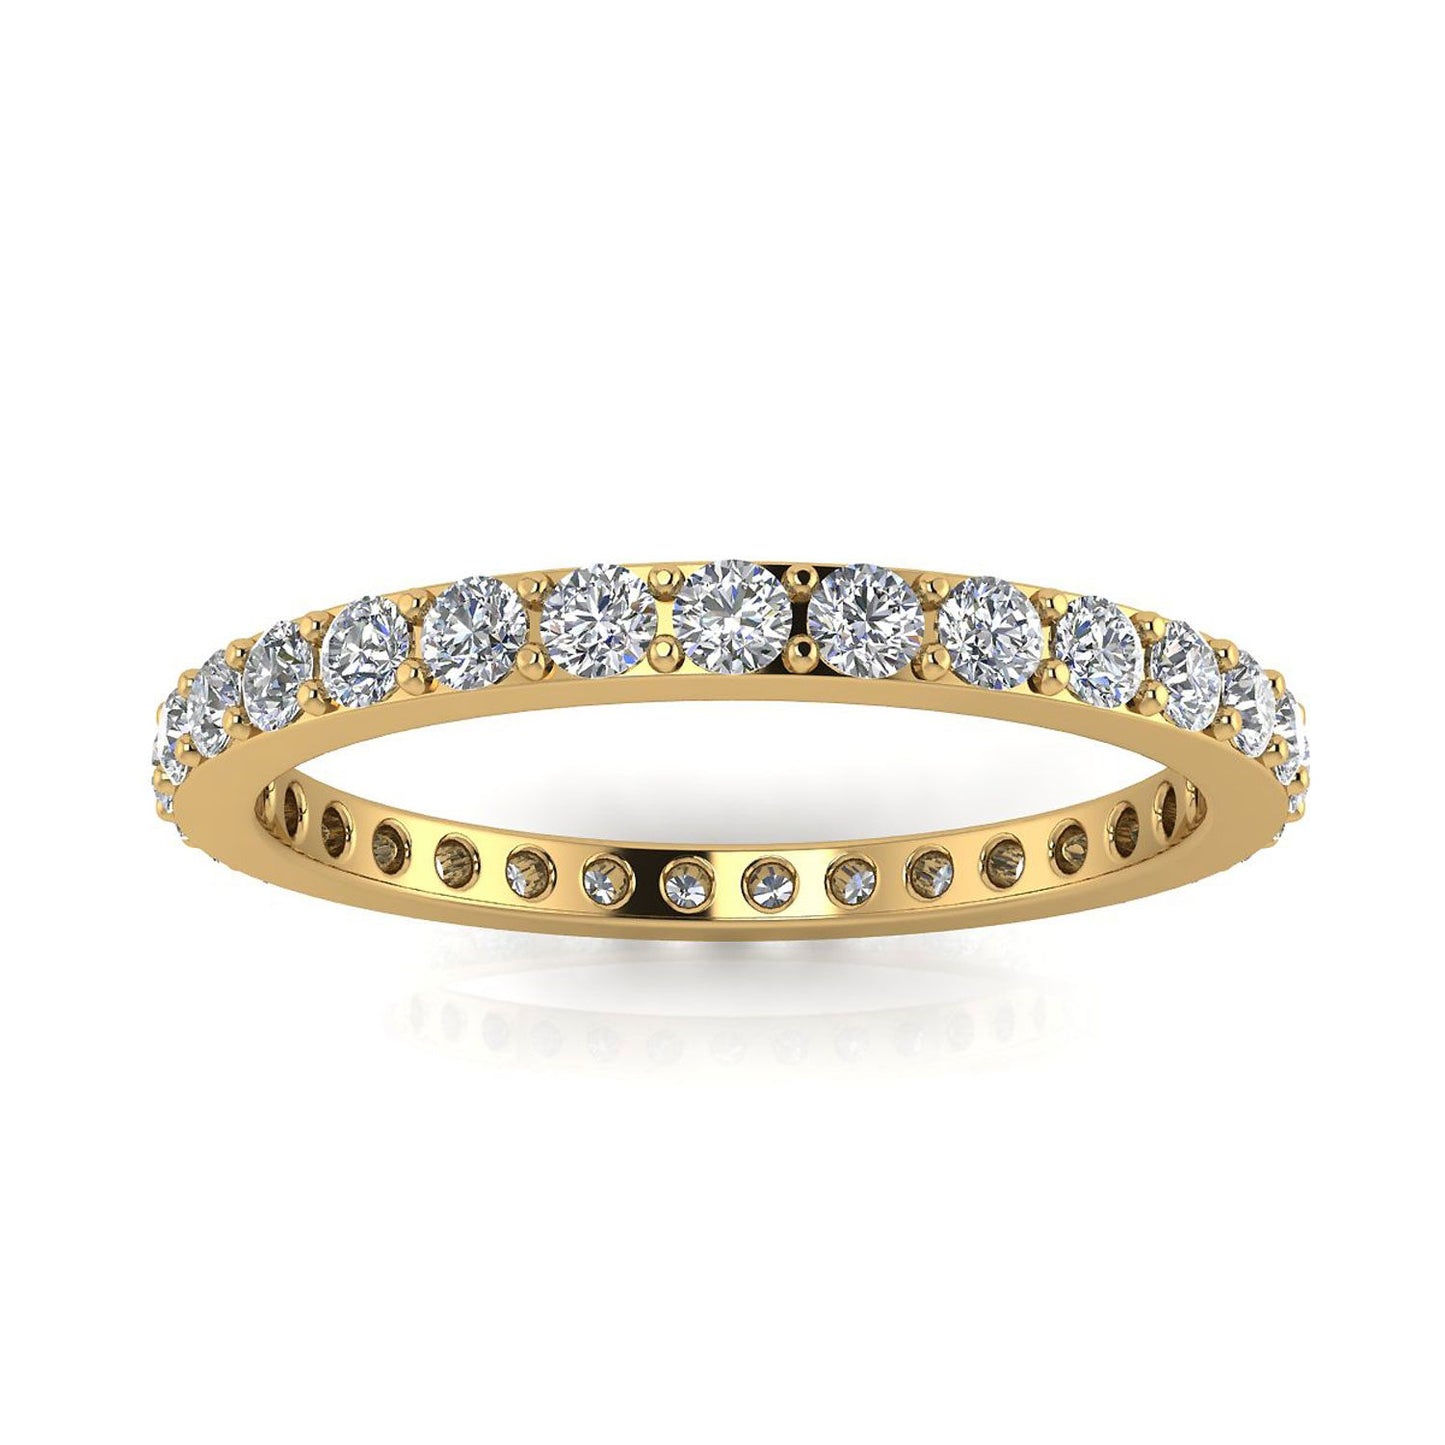 Round Brilliant Cut Diamond Pave Set Eternity Ring In 14k Yellow Gold  (0.47ct. Tw.) Ring Size 6.5